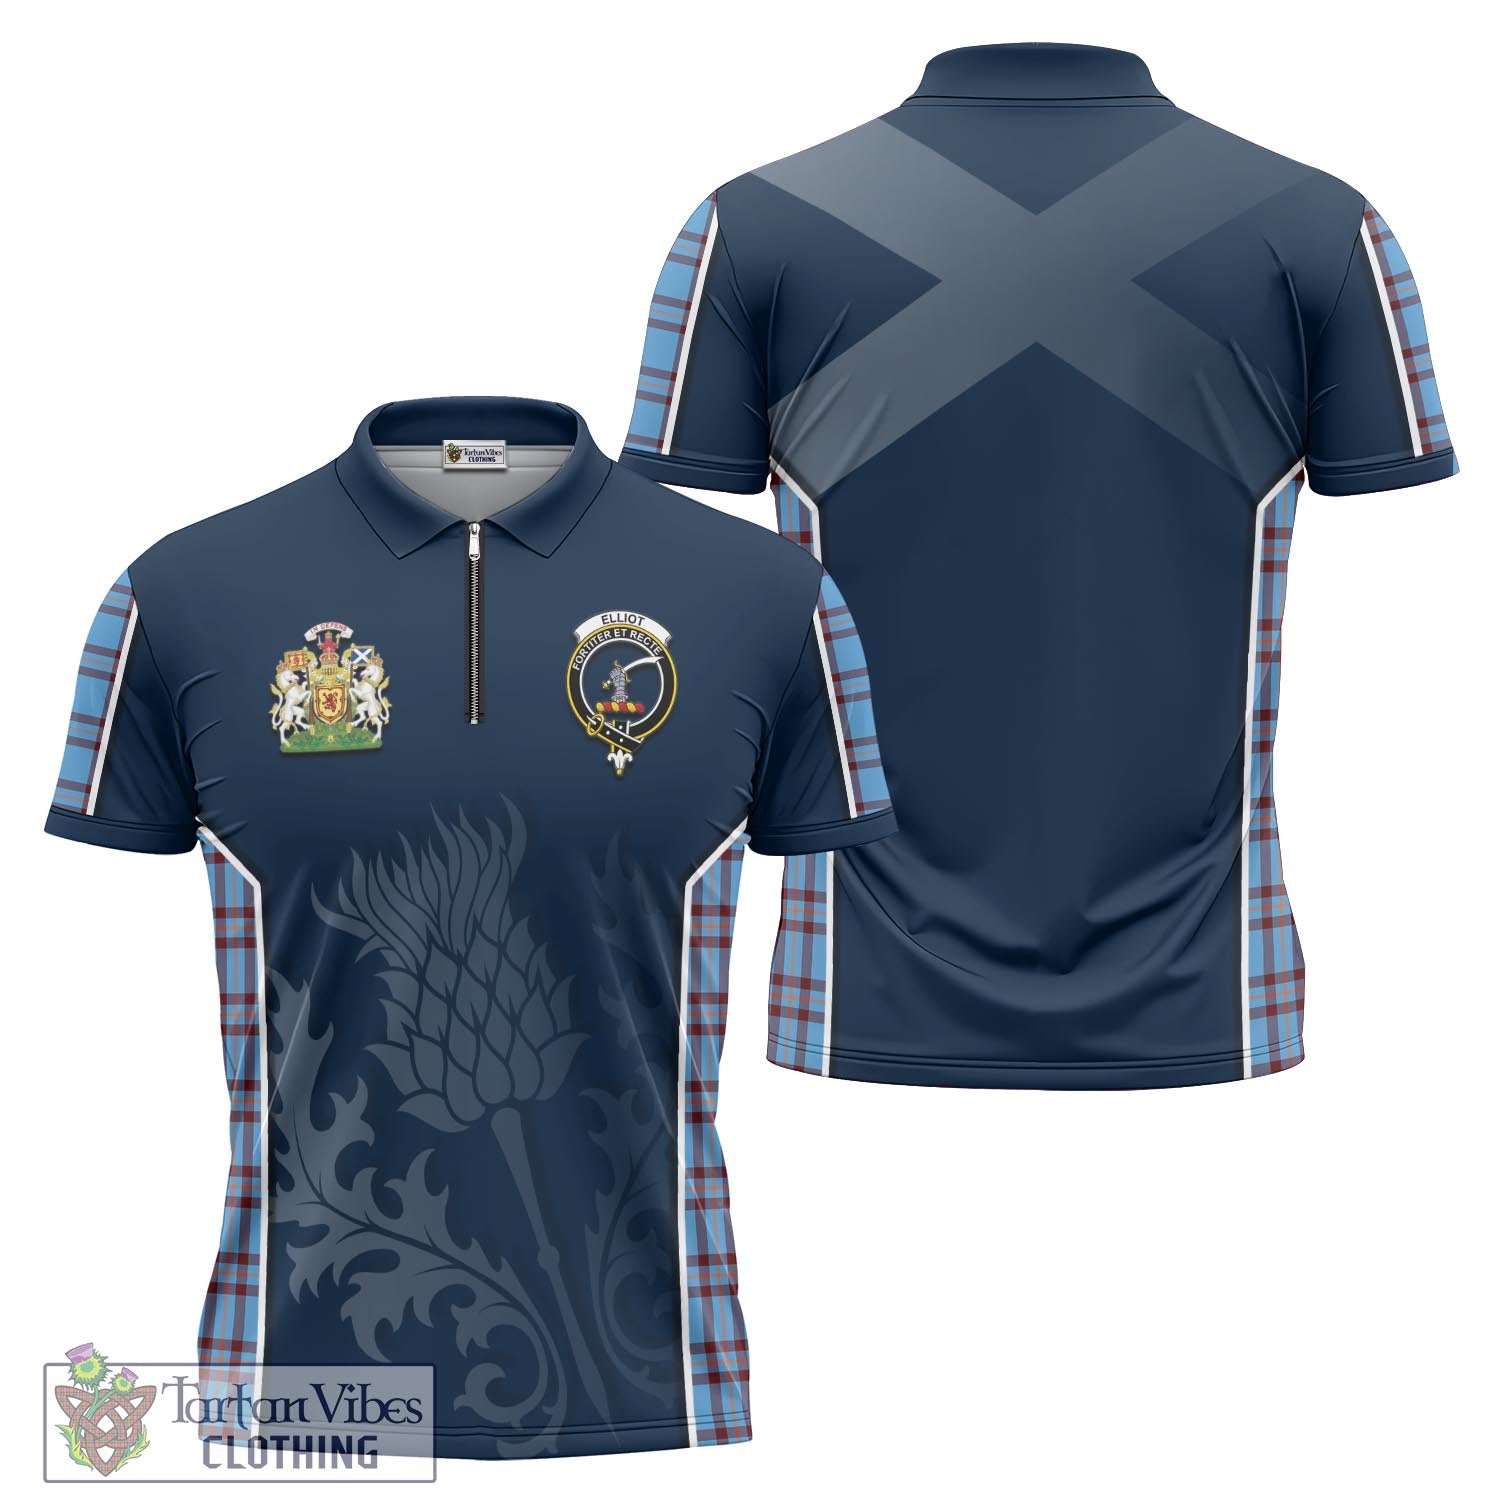 Tartan Vibes Clothing Elliot Ancient Tartan Zipper Polo Shirt with Family Crest and Scottish Thistle Vibes Sport Style